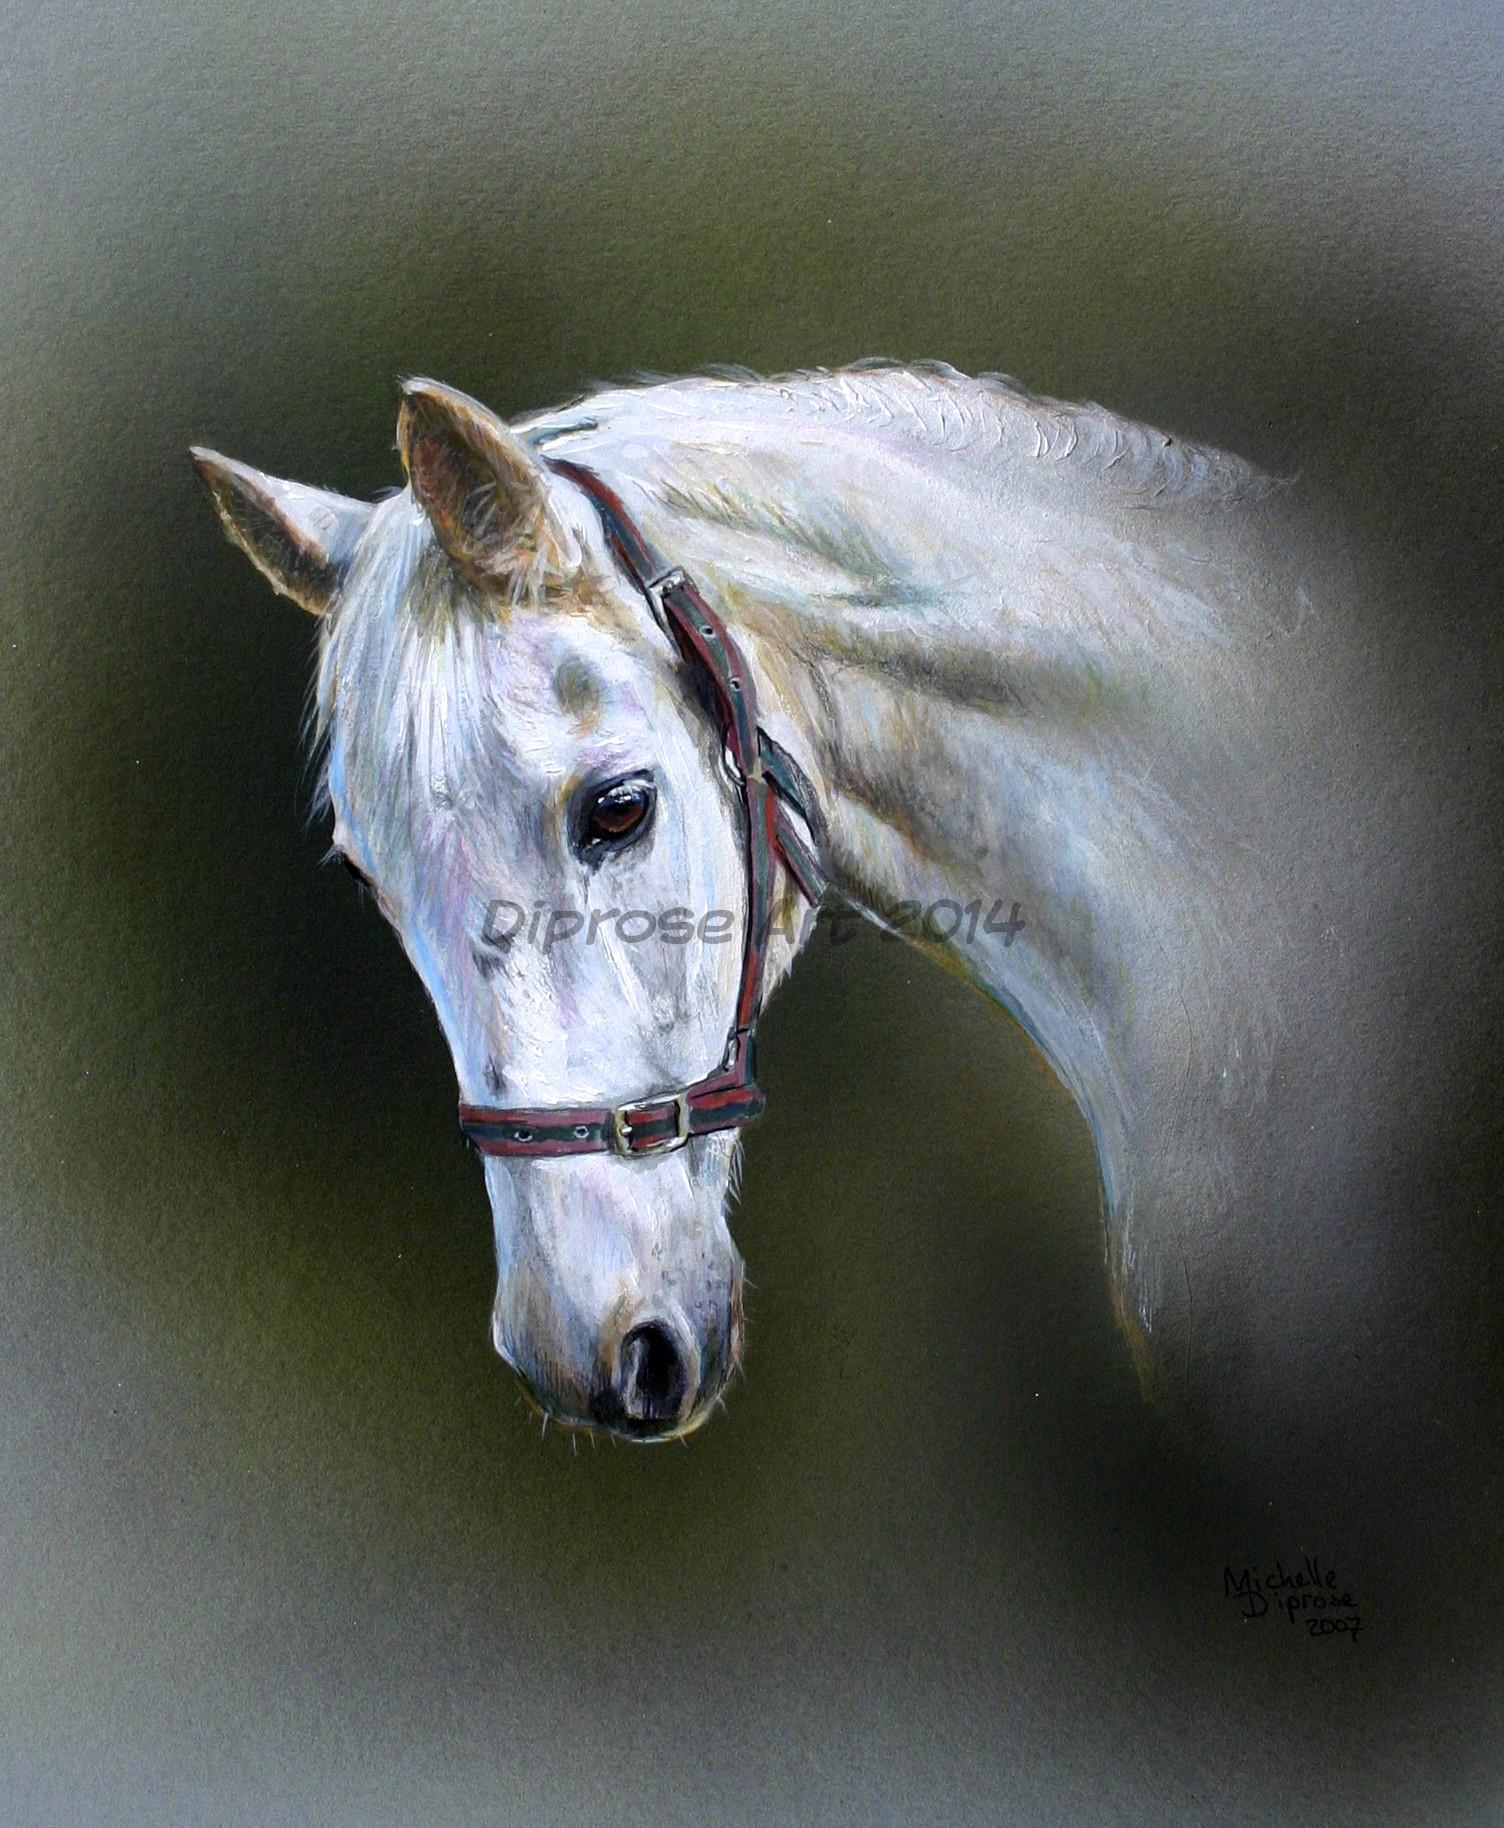 acrylics on board - approx A4 -  horse portrait - Grey horses are difficult to paint - you can&#039;t rely on a gleaming shiny coat to give the painting interest but I think the contrast between light and shade and the head position make this one work well.